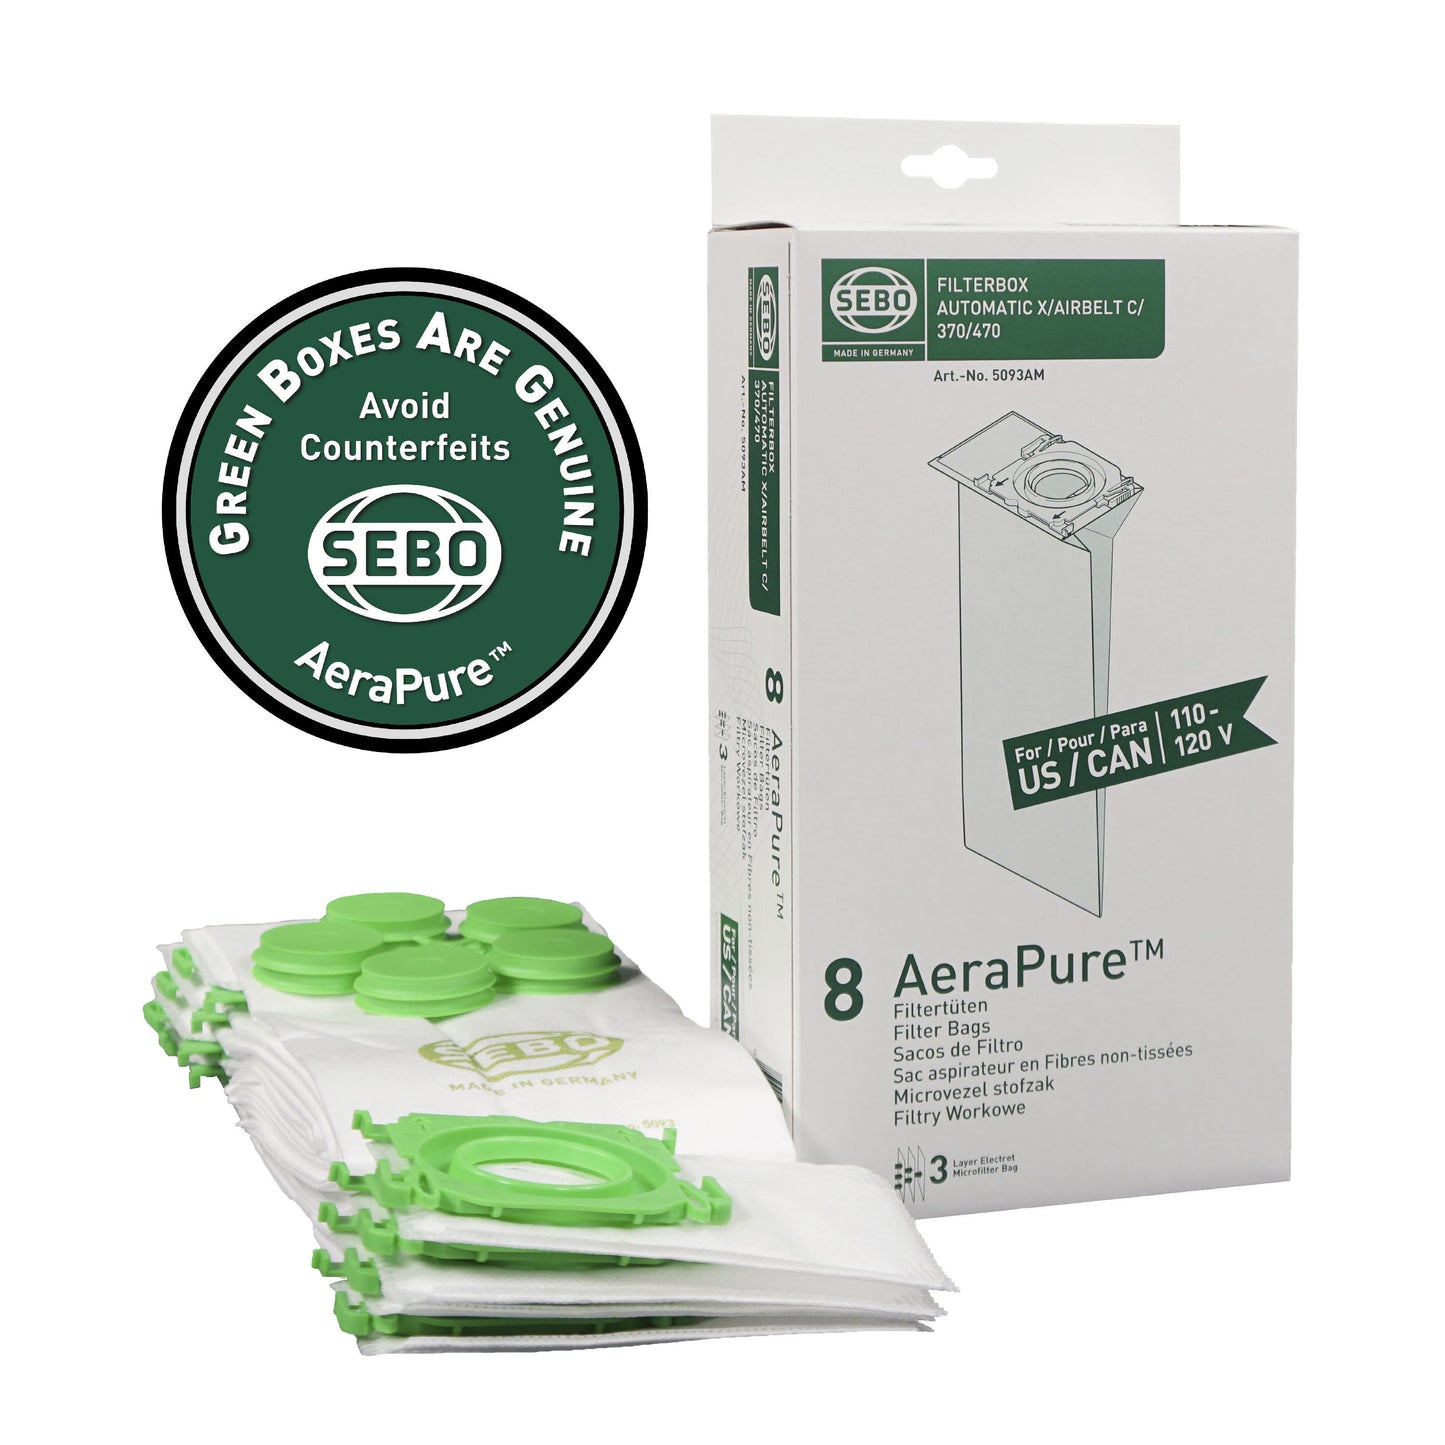 SEBO AUTOMATIC X / AIRBELT C AeraPure Filter Bags (8-Pack)